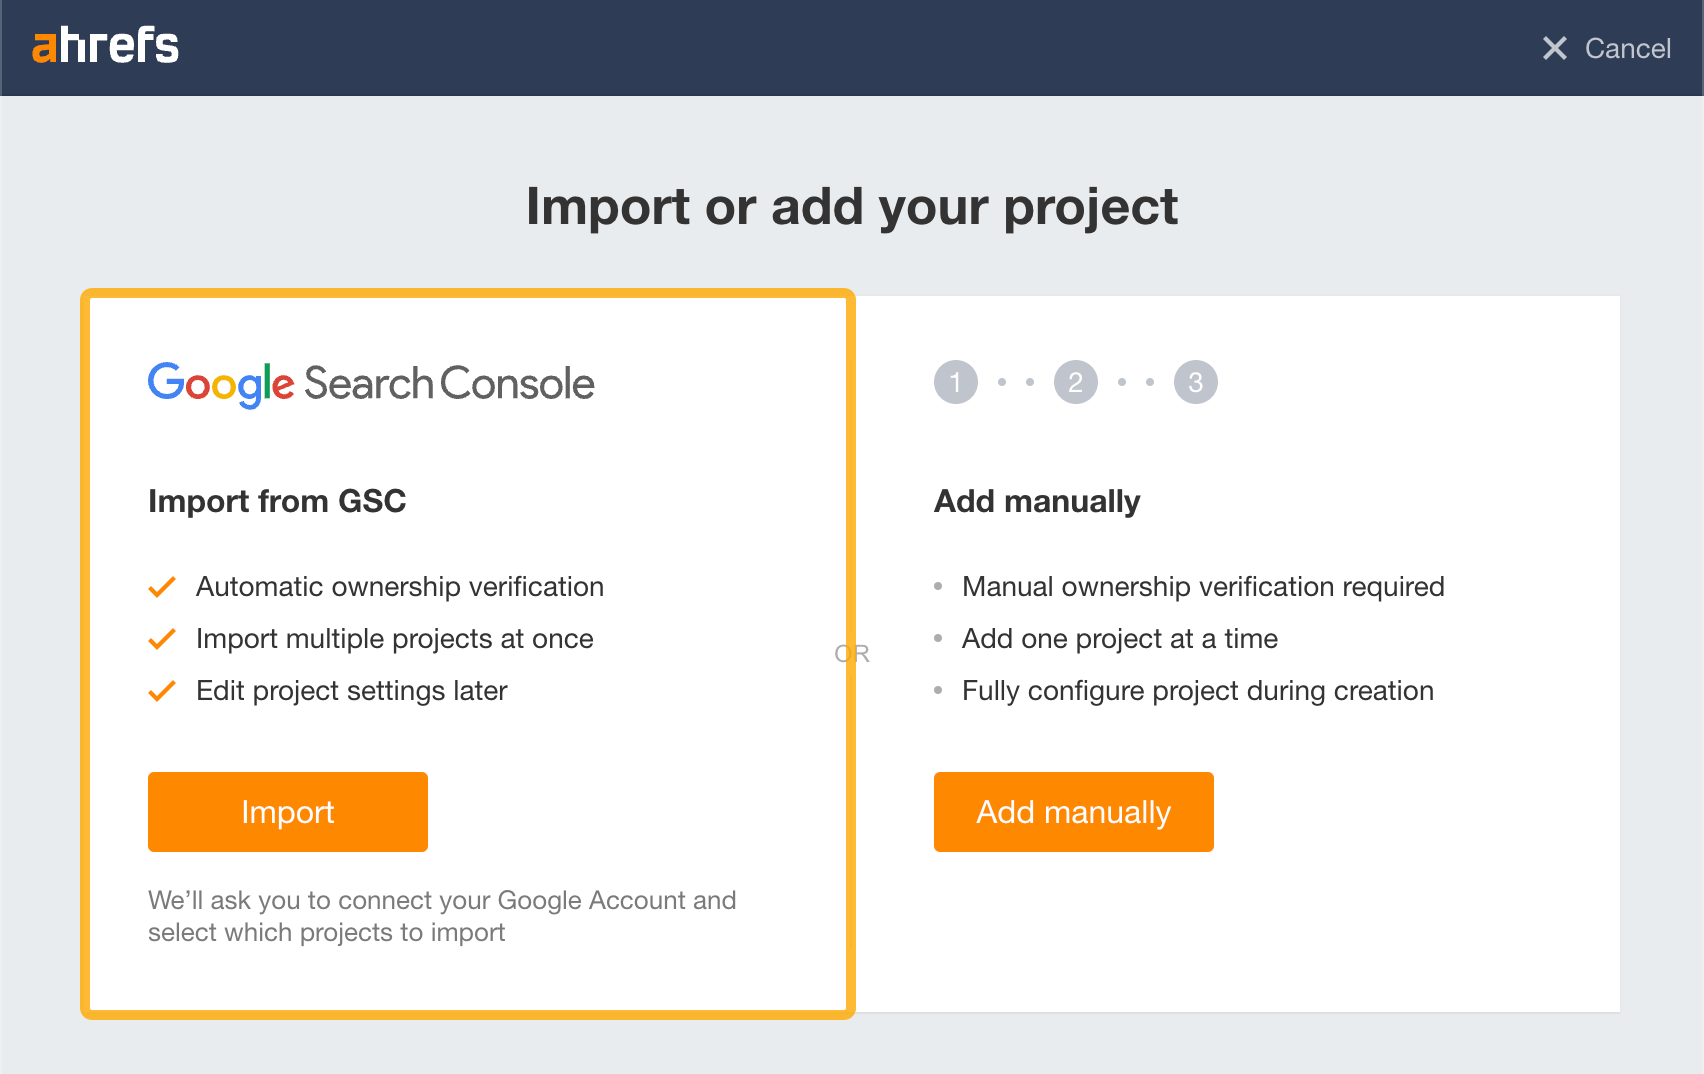 How to add a project from Google Search Console in Ahrefs